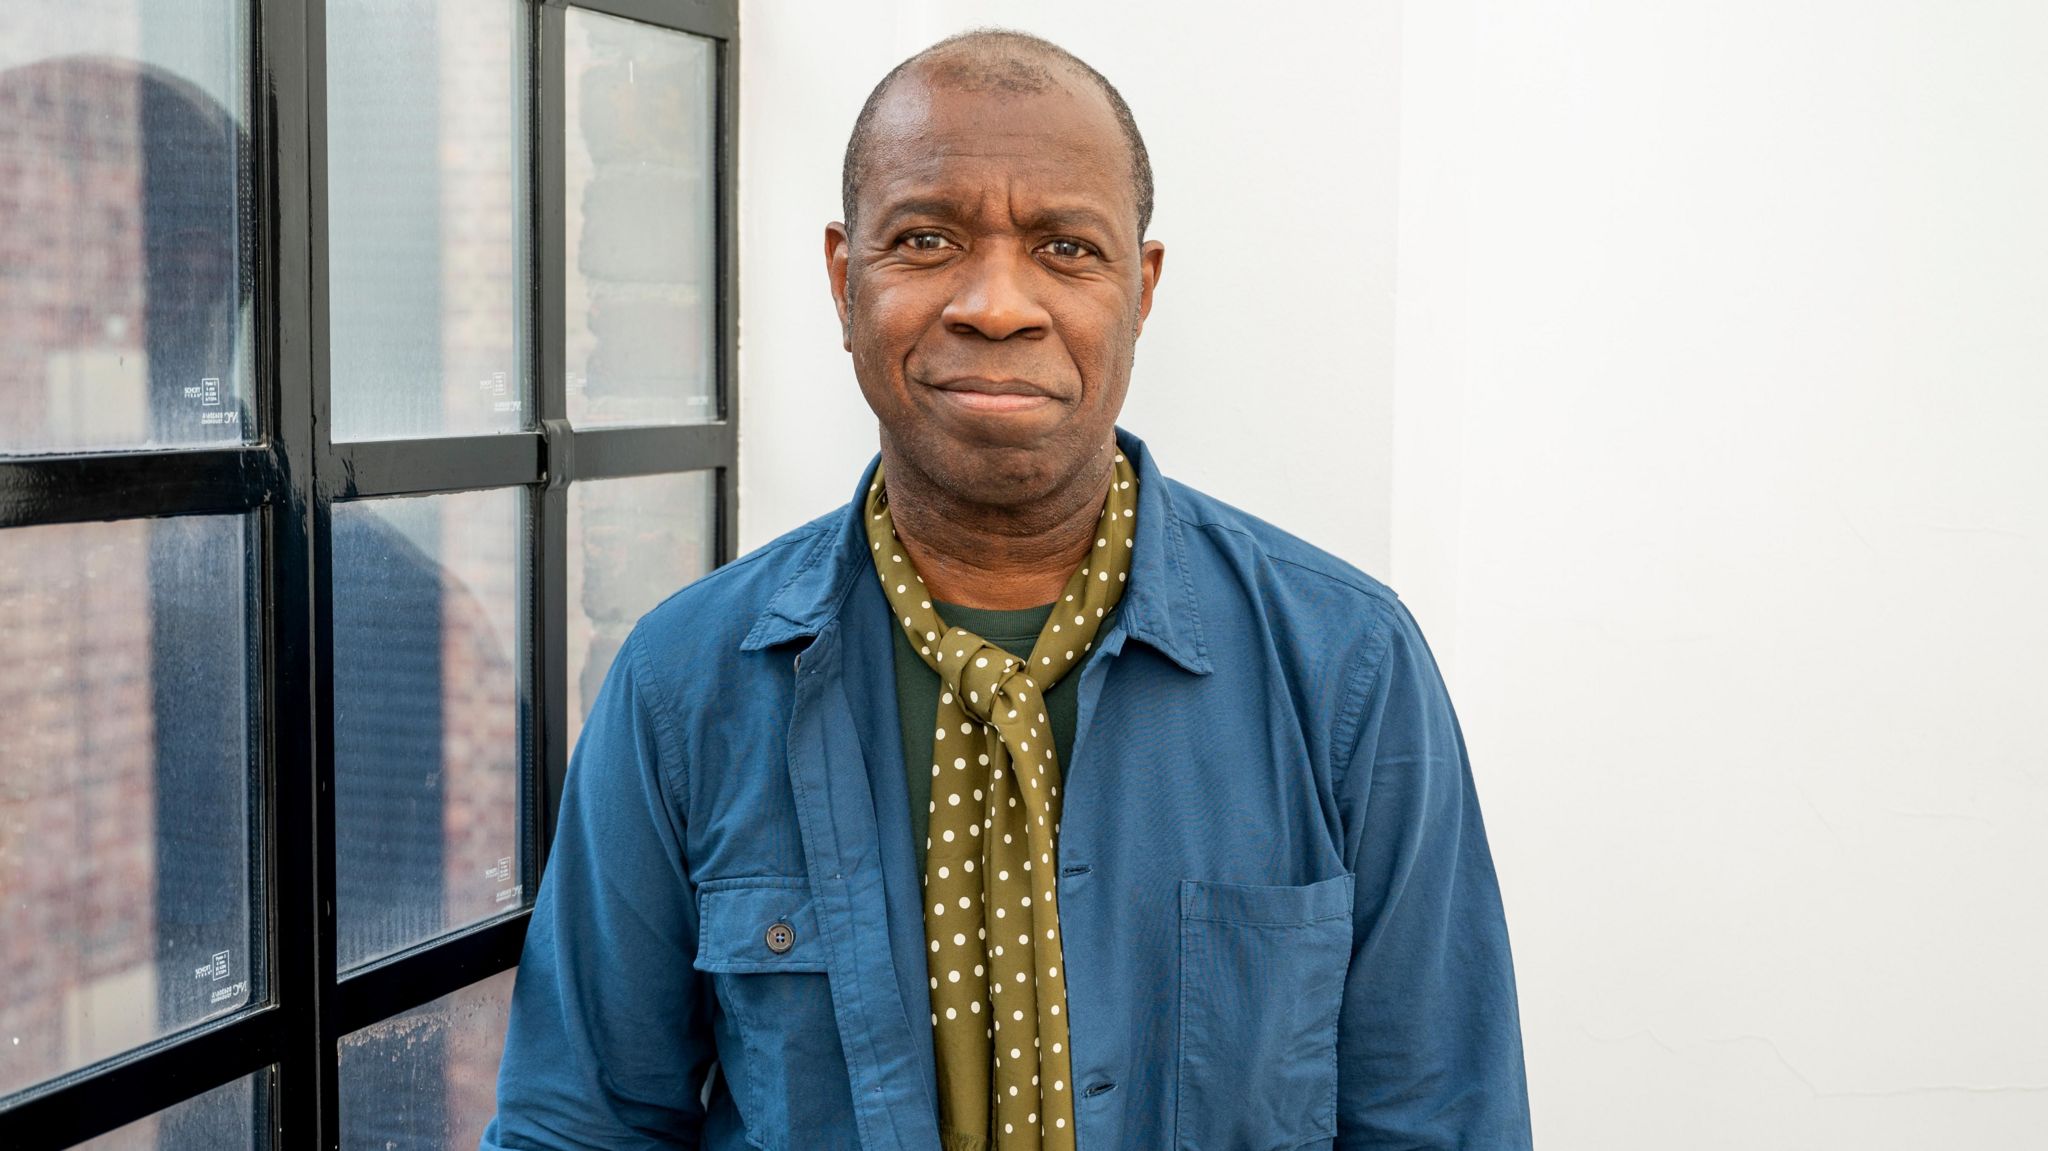 Clive Myrie stood next to a white wall and window